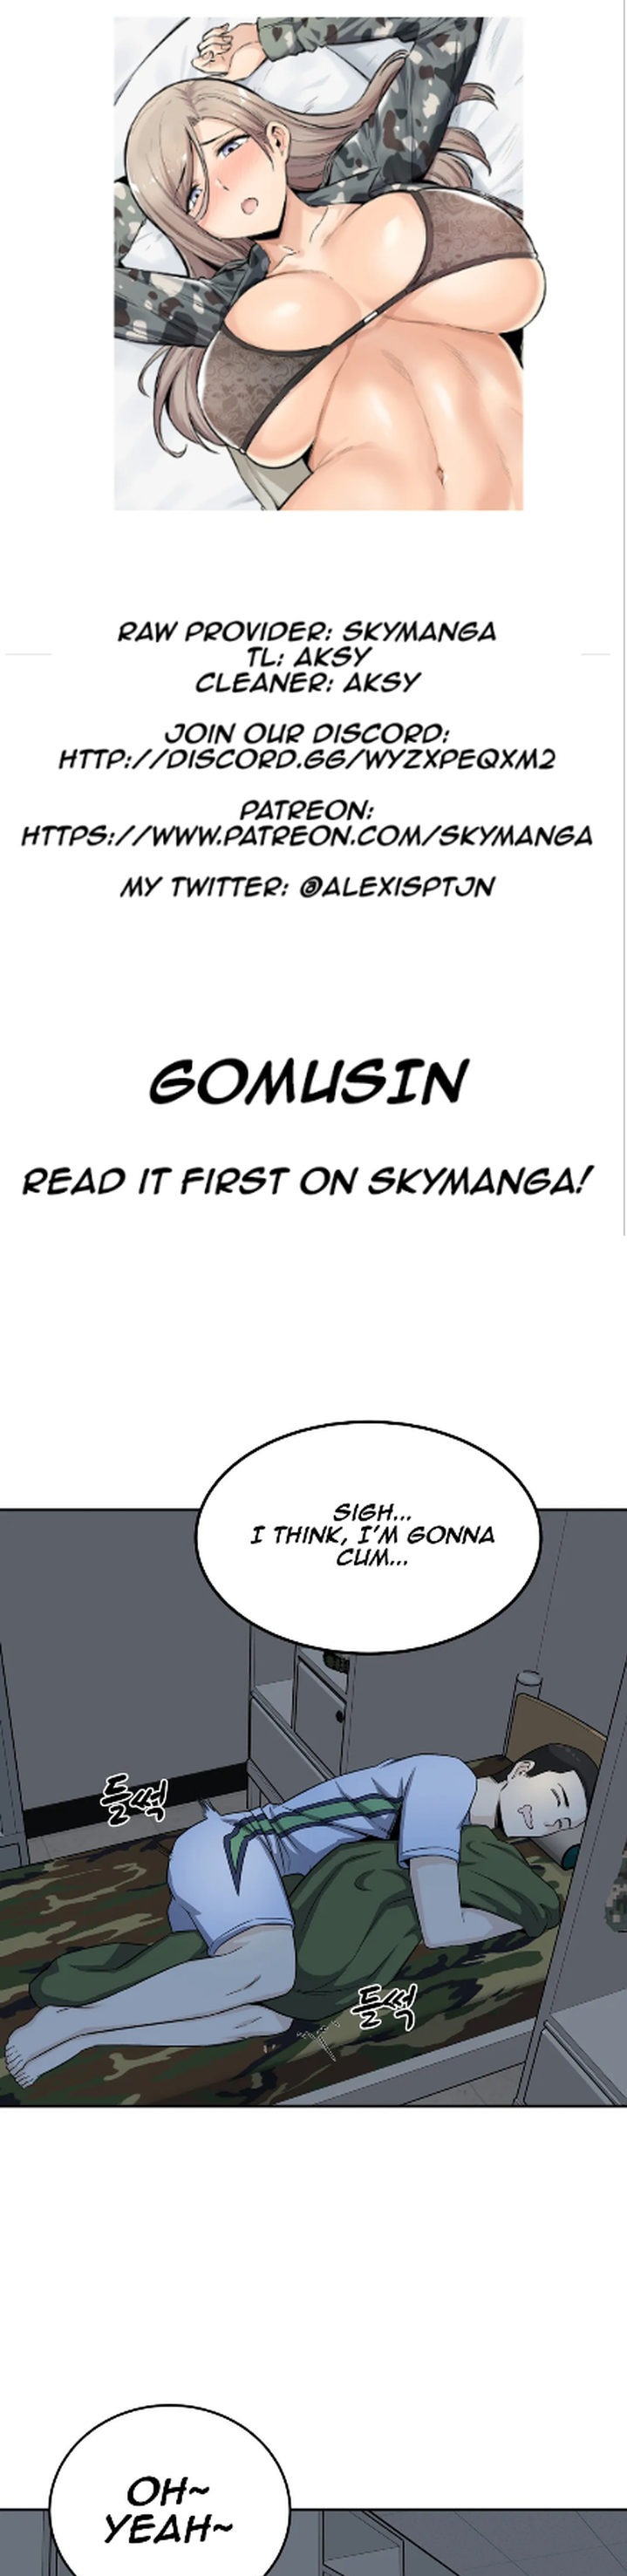 Gomusin - Chapter 4 Page 1